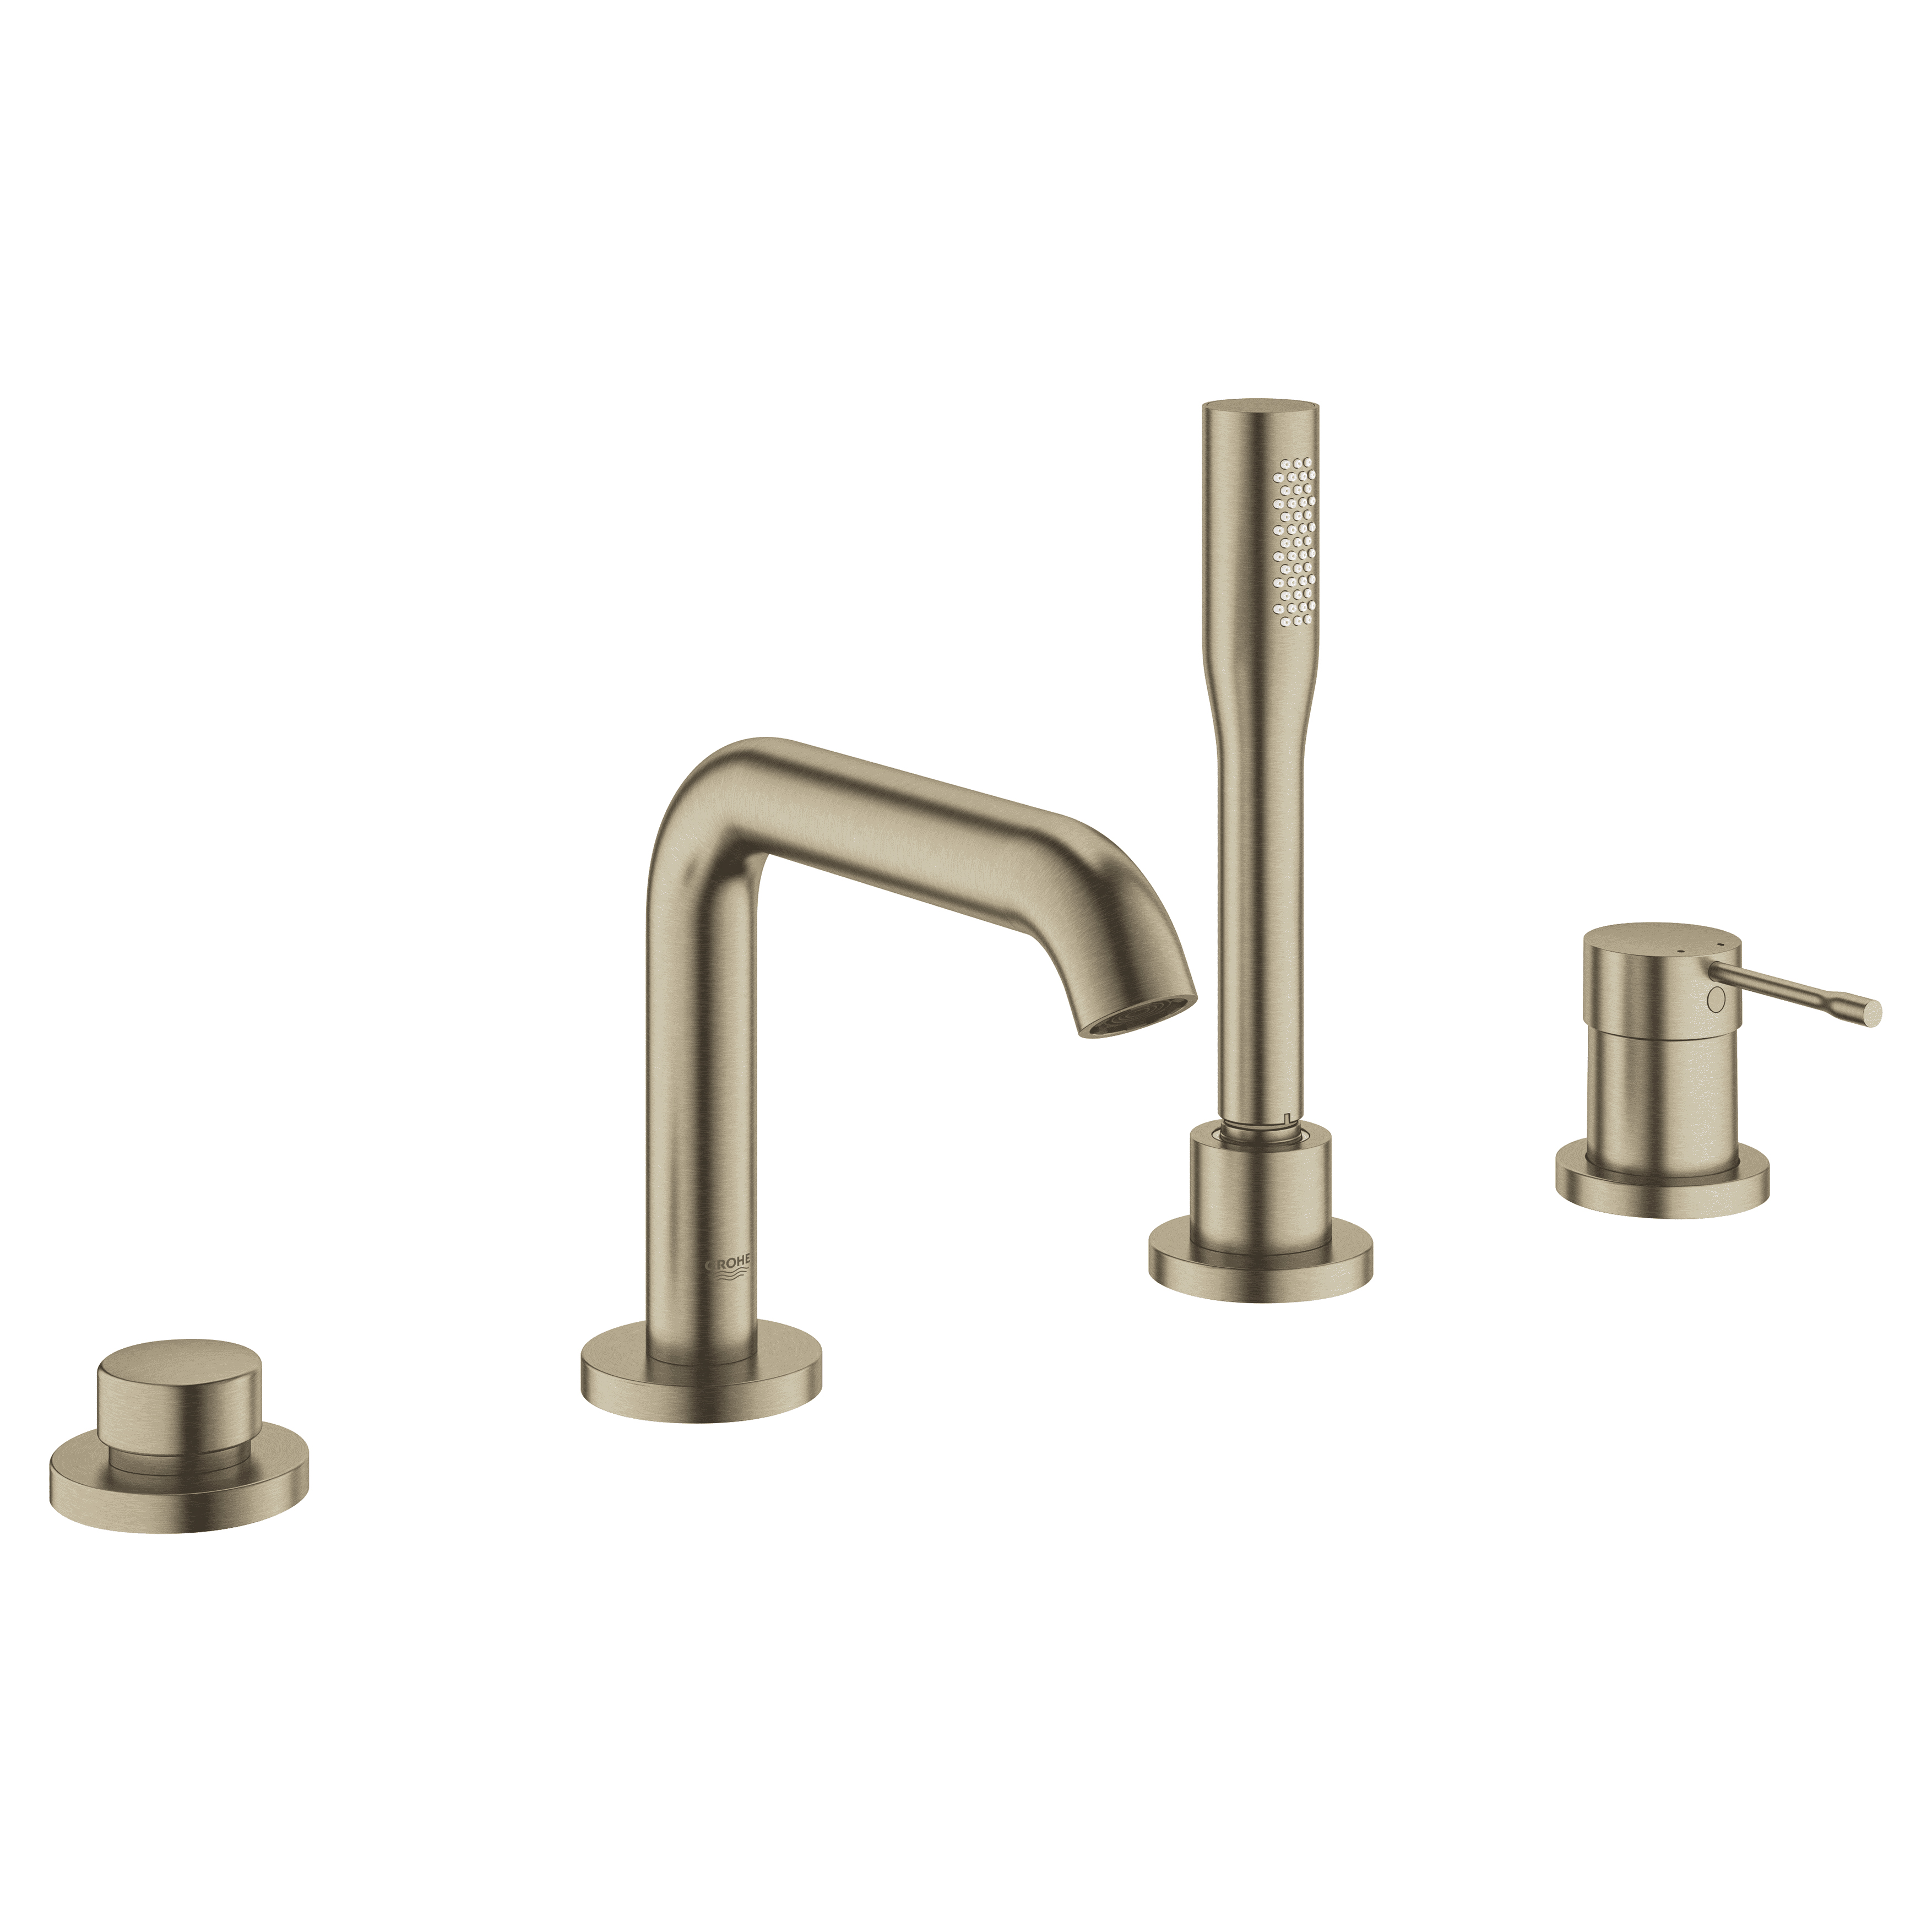 Essence Deck Mount Roman Tub Faucet w/Hand Shower in Brushed Nickel